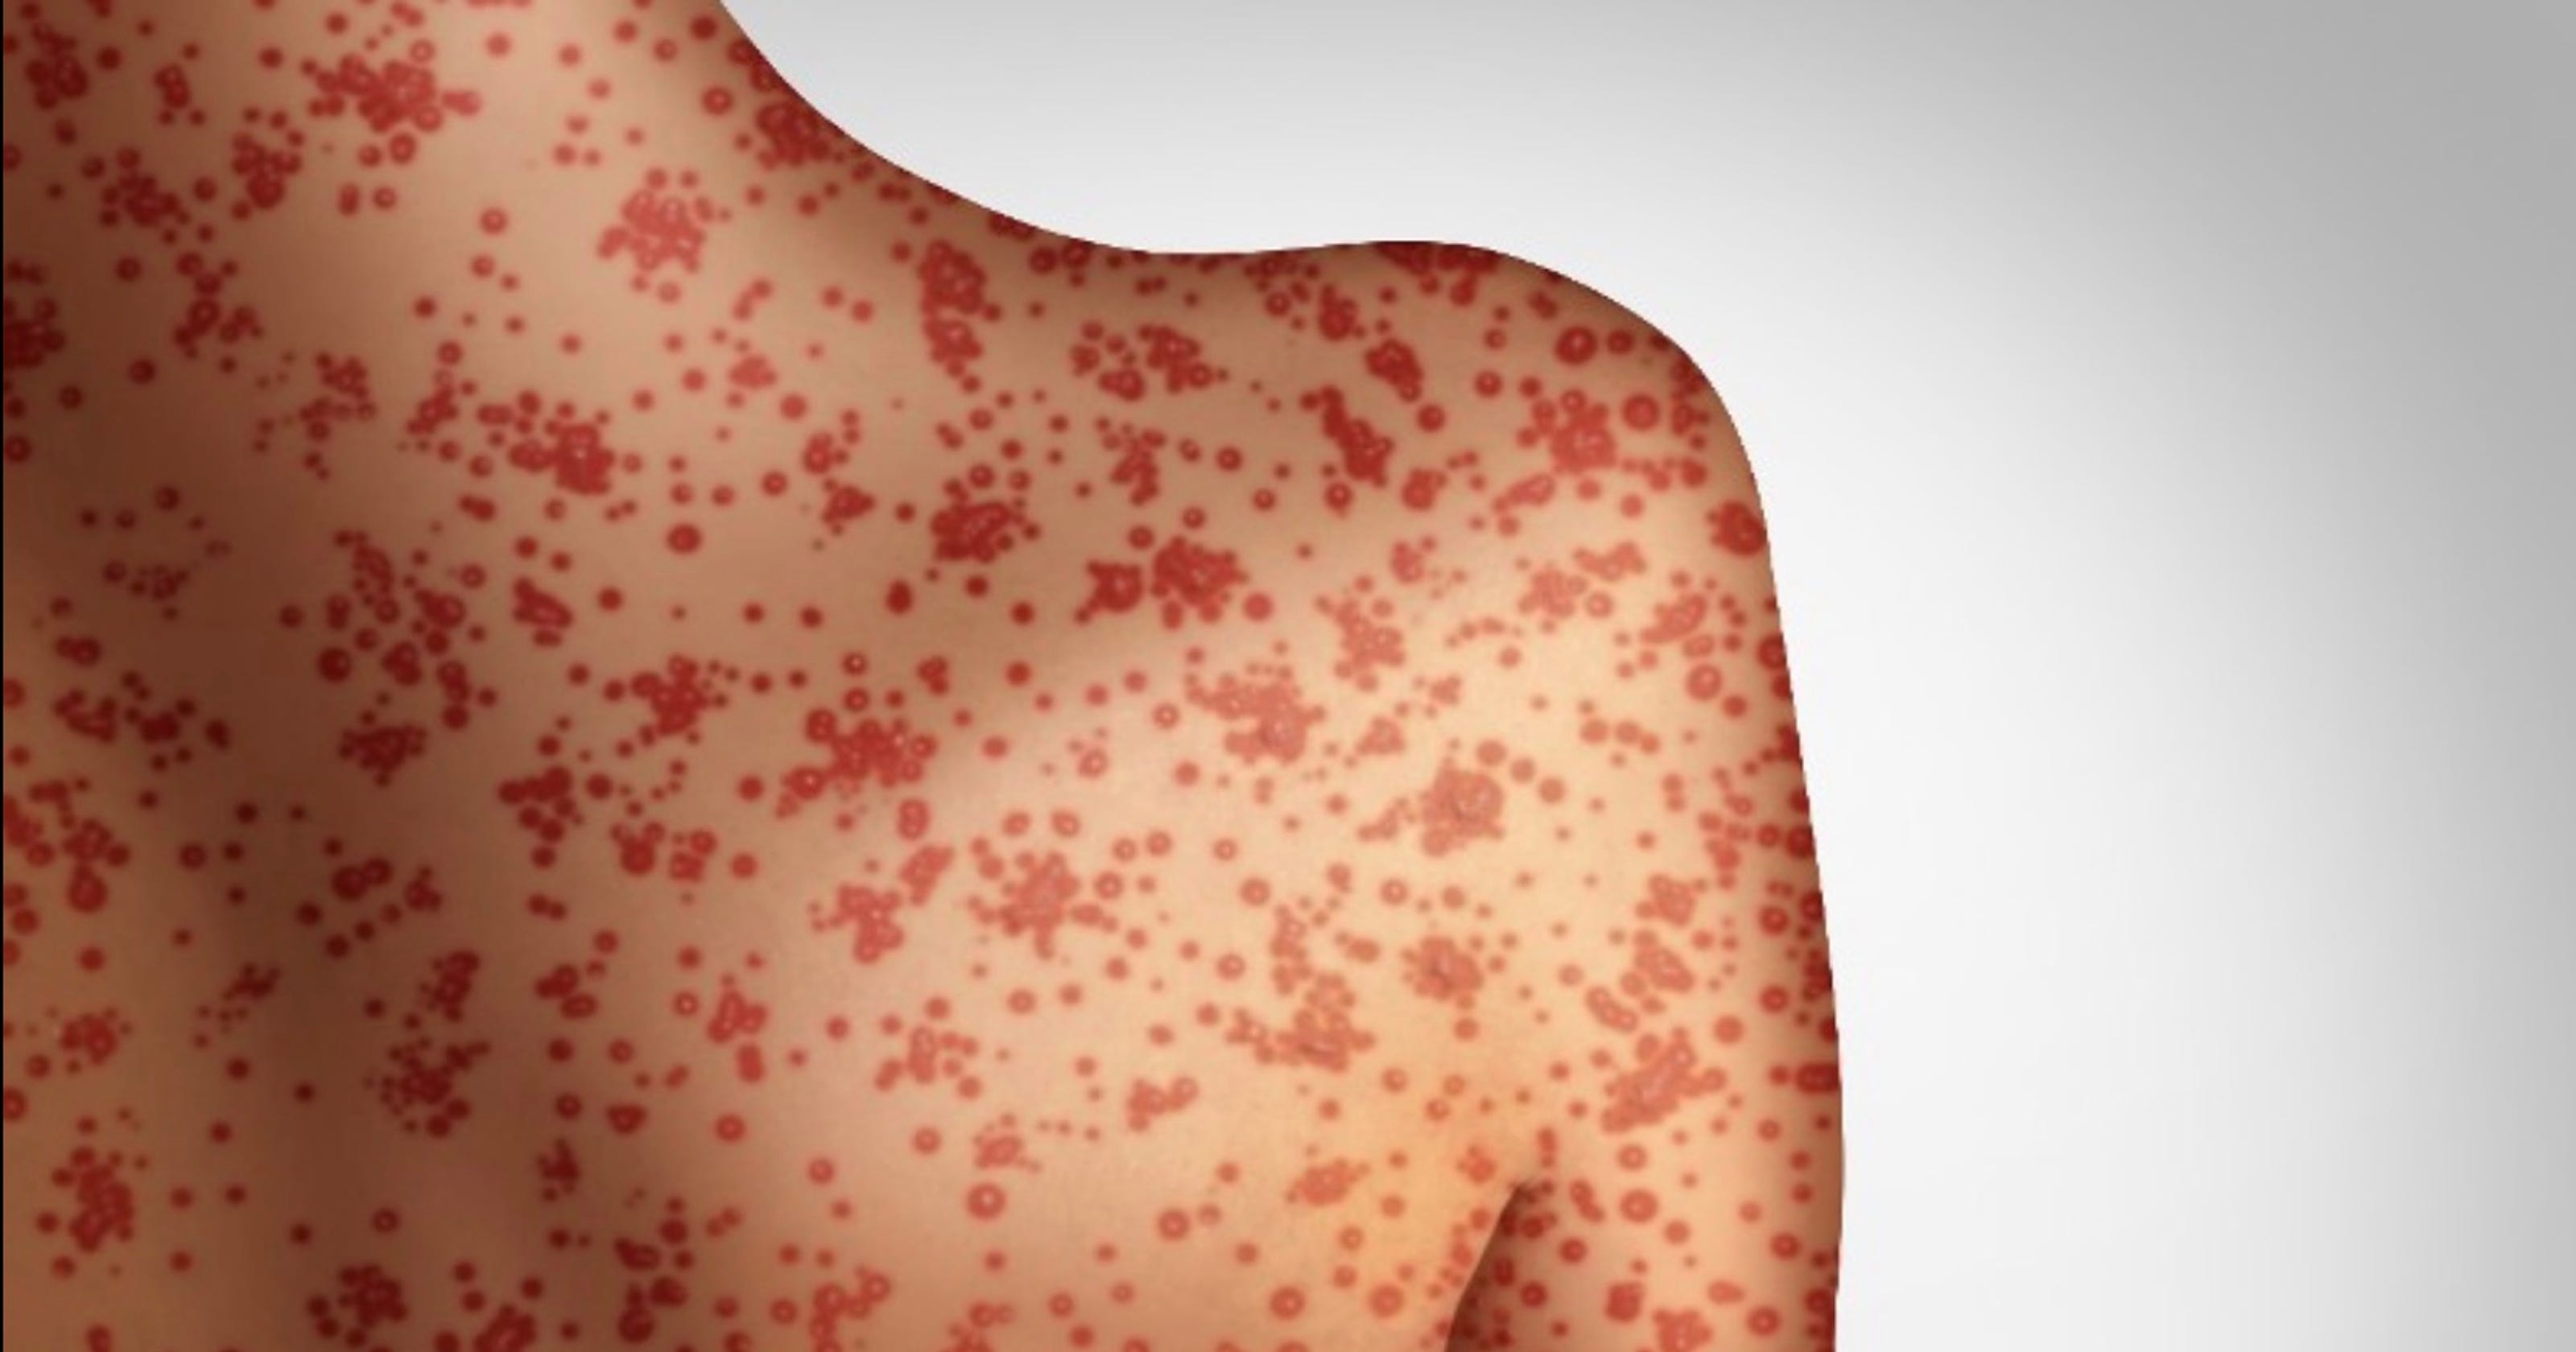 Measles arrives in Florida, what is it and what can you do?